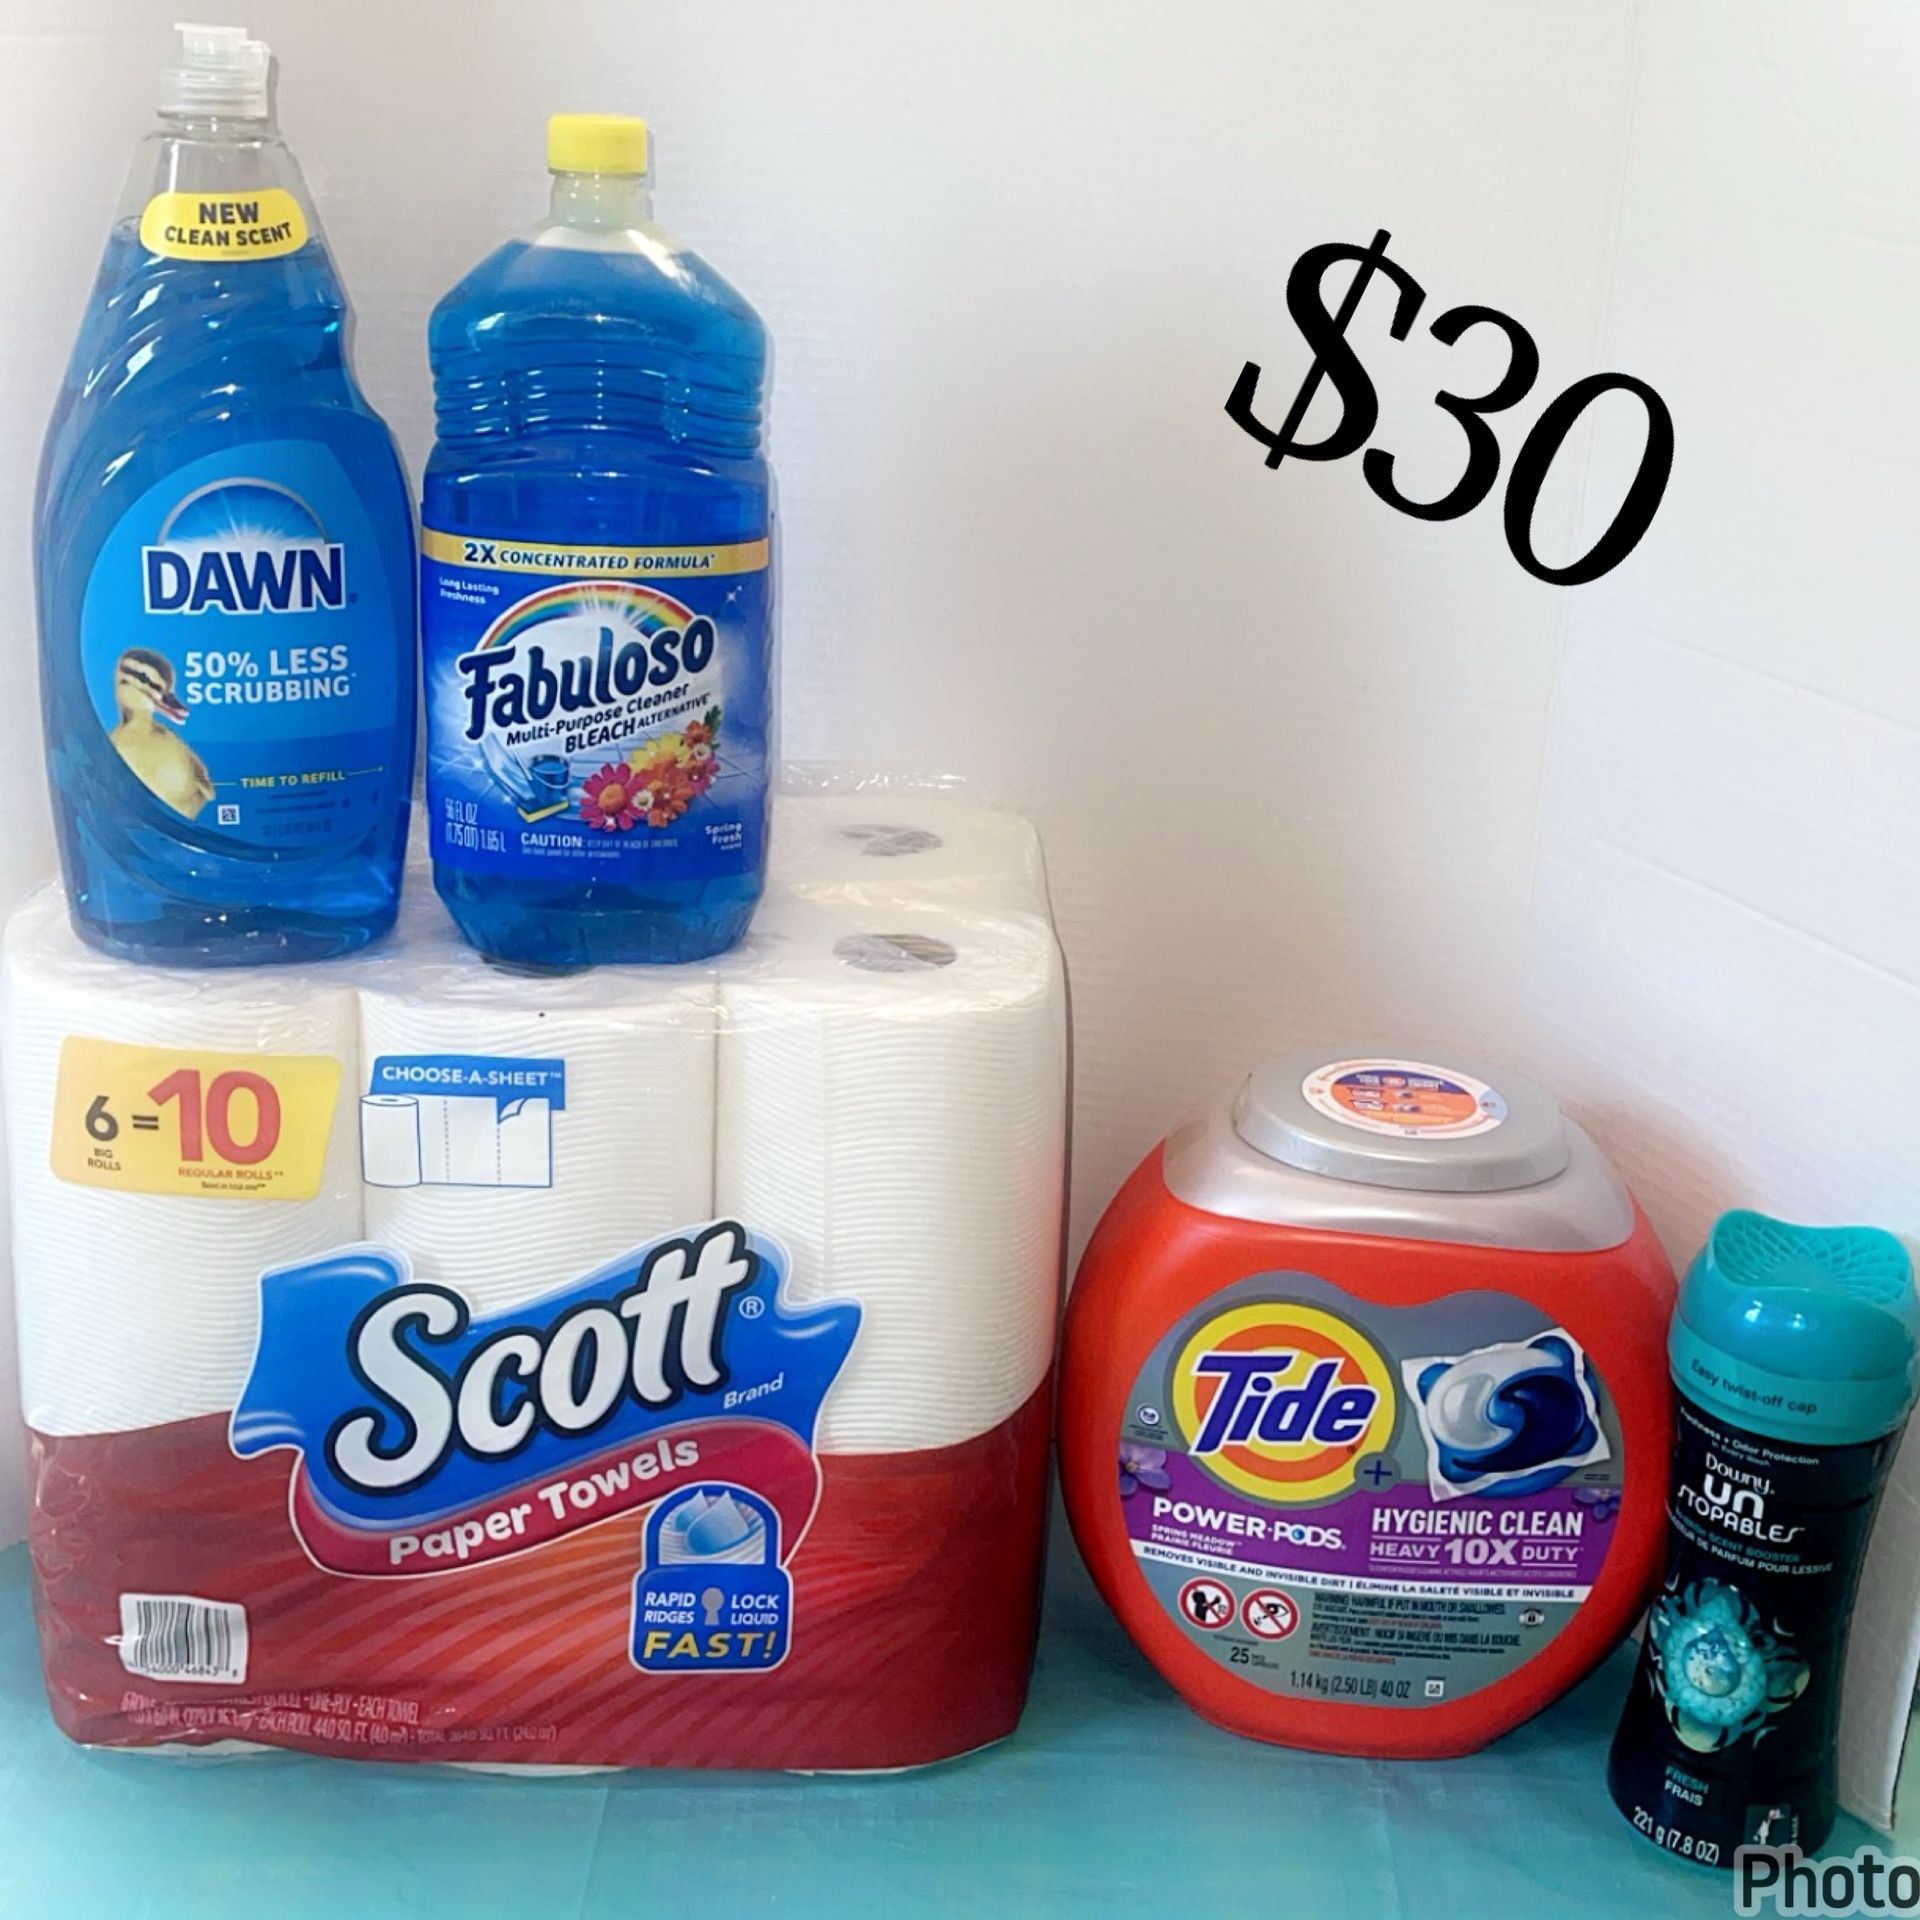 Tide Downy scott fabuloso dawn everything for $30